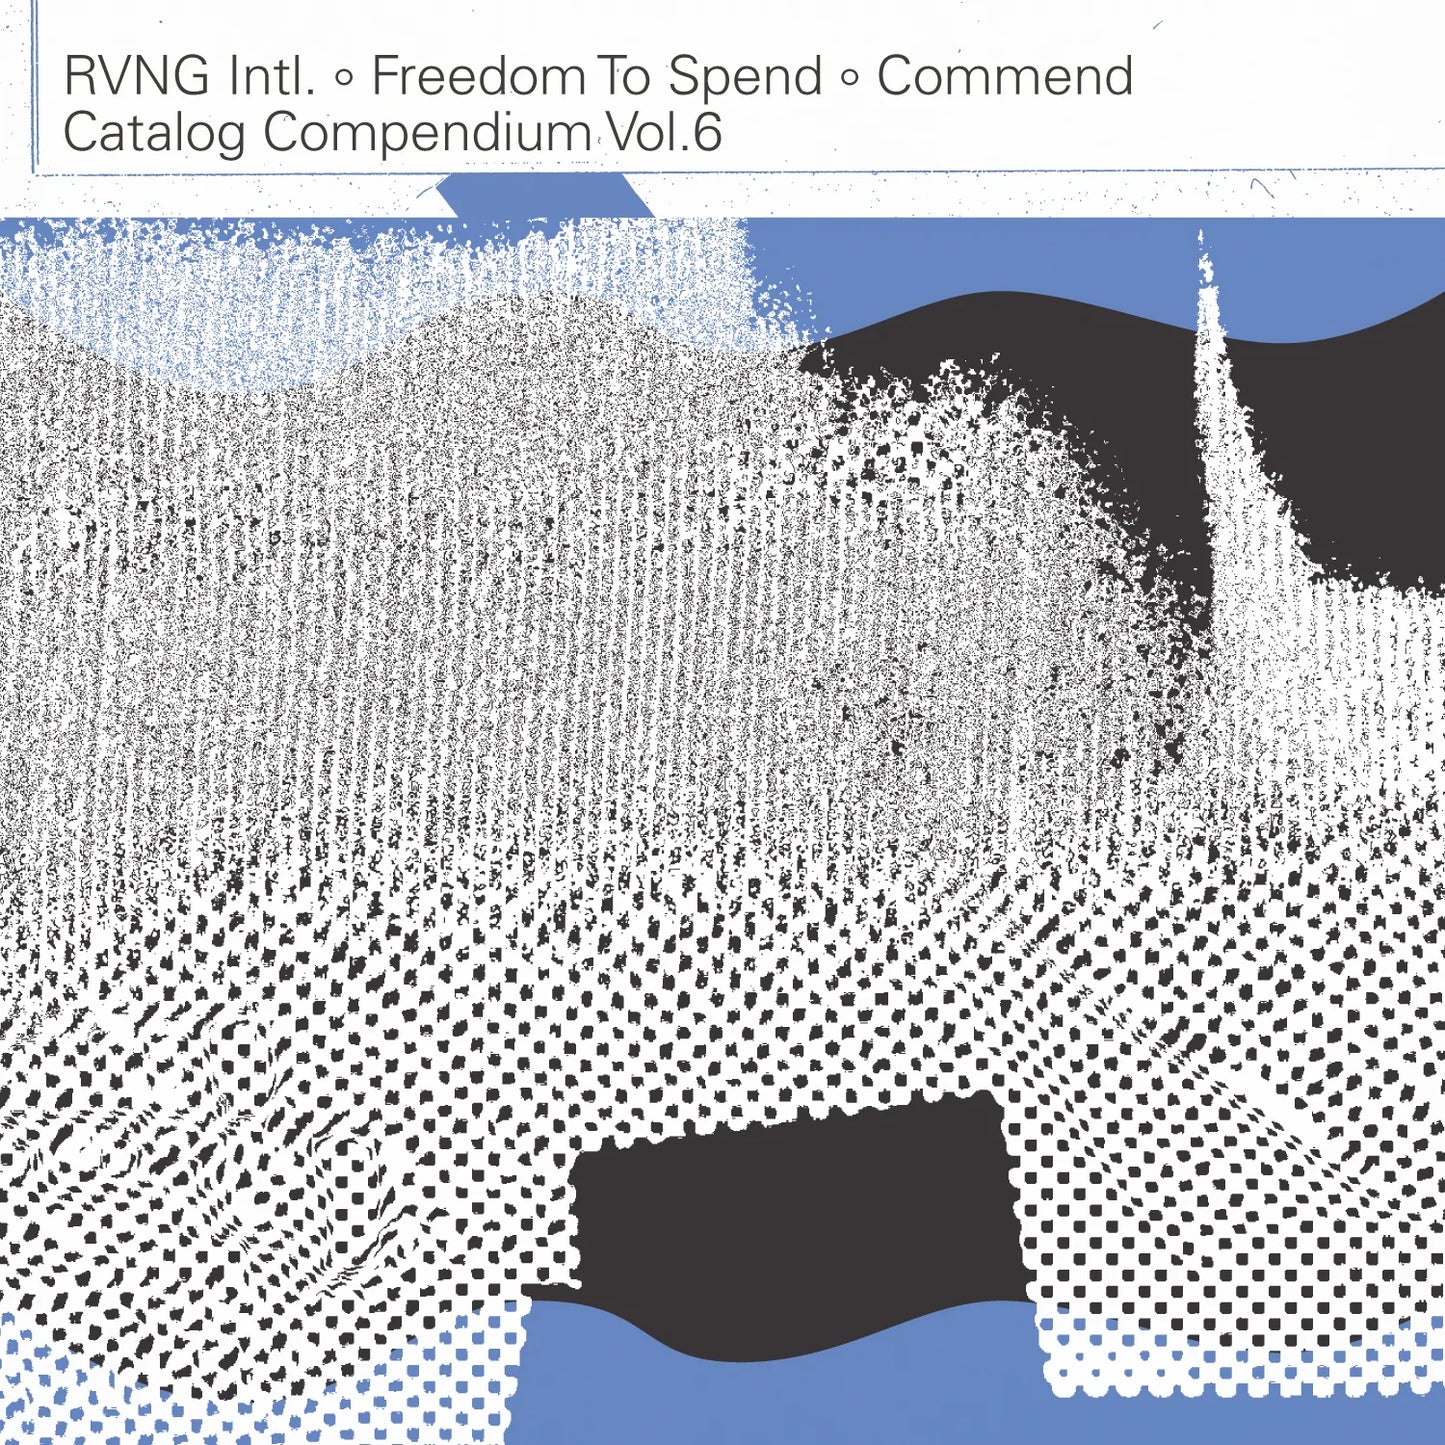 RVNG Intl - Freedom To Spend - Commend Catalog Compendium Vol.6